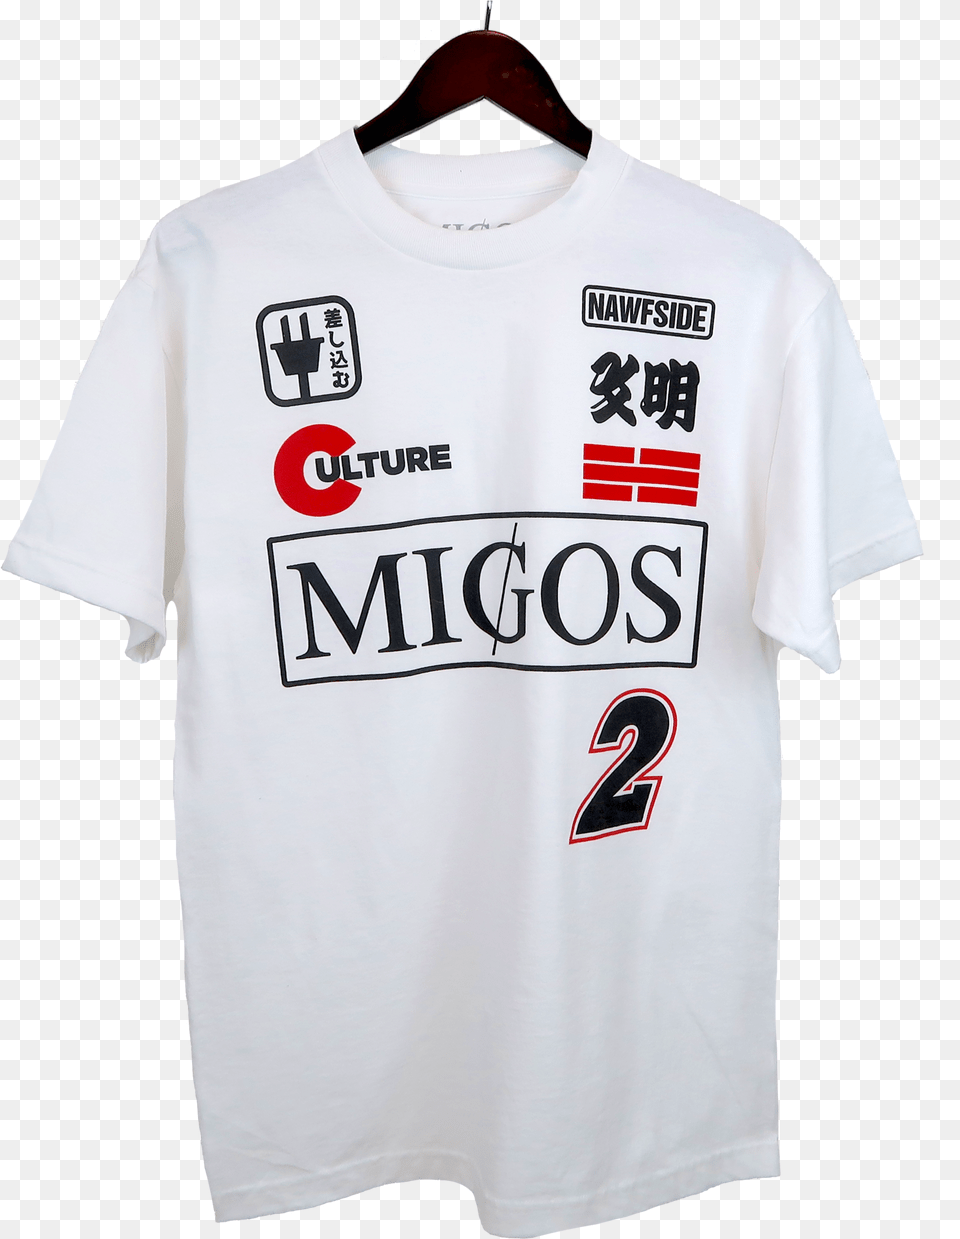 Migos Culture 2 Merch, Clothing, Shirt, T-shirt, Jersey Free Png Download